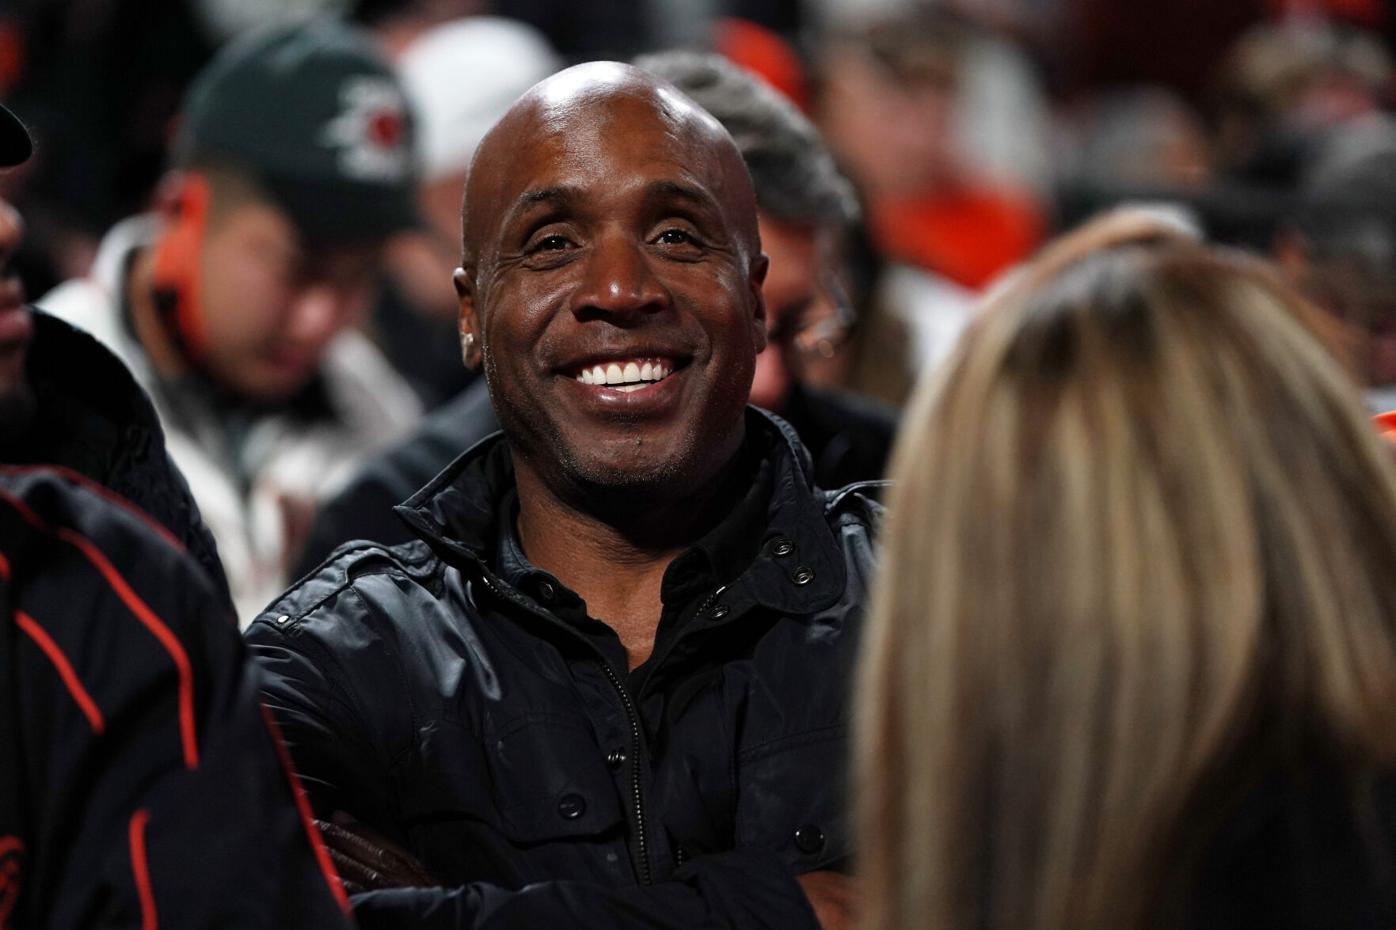 World Series champ endorses Barry Bonds' Hall of Fame candidacy